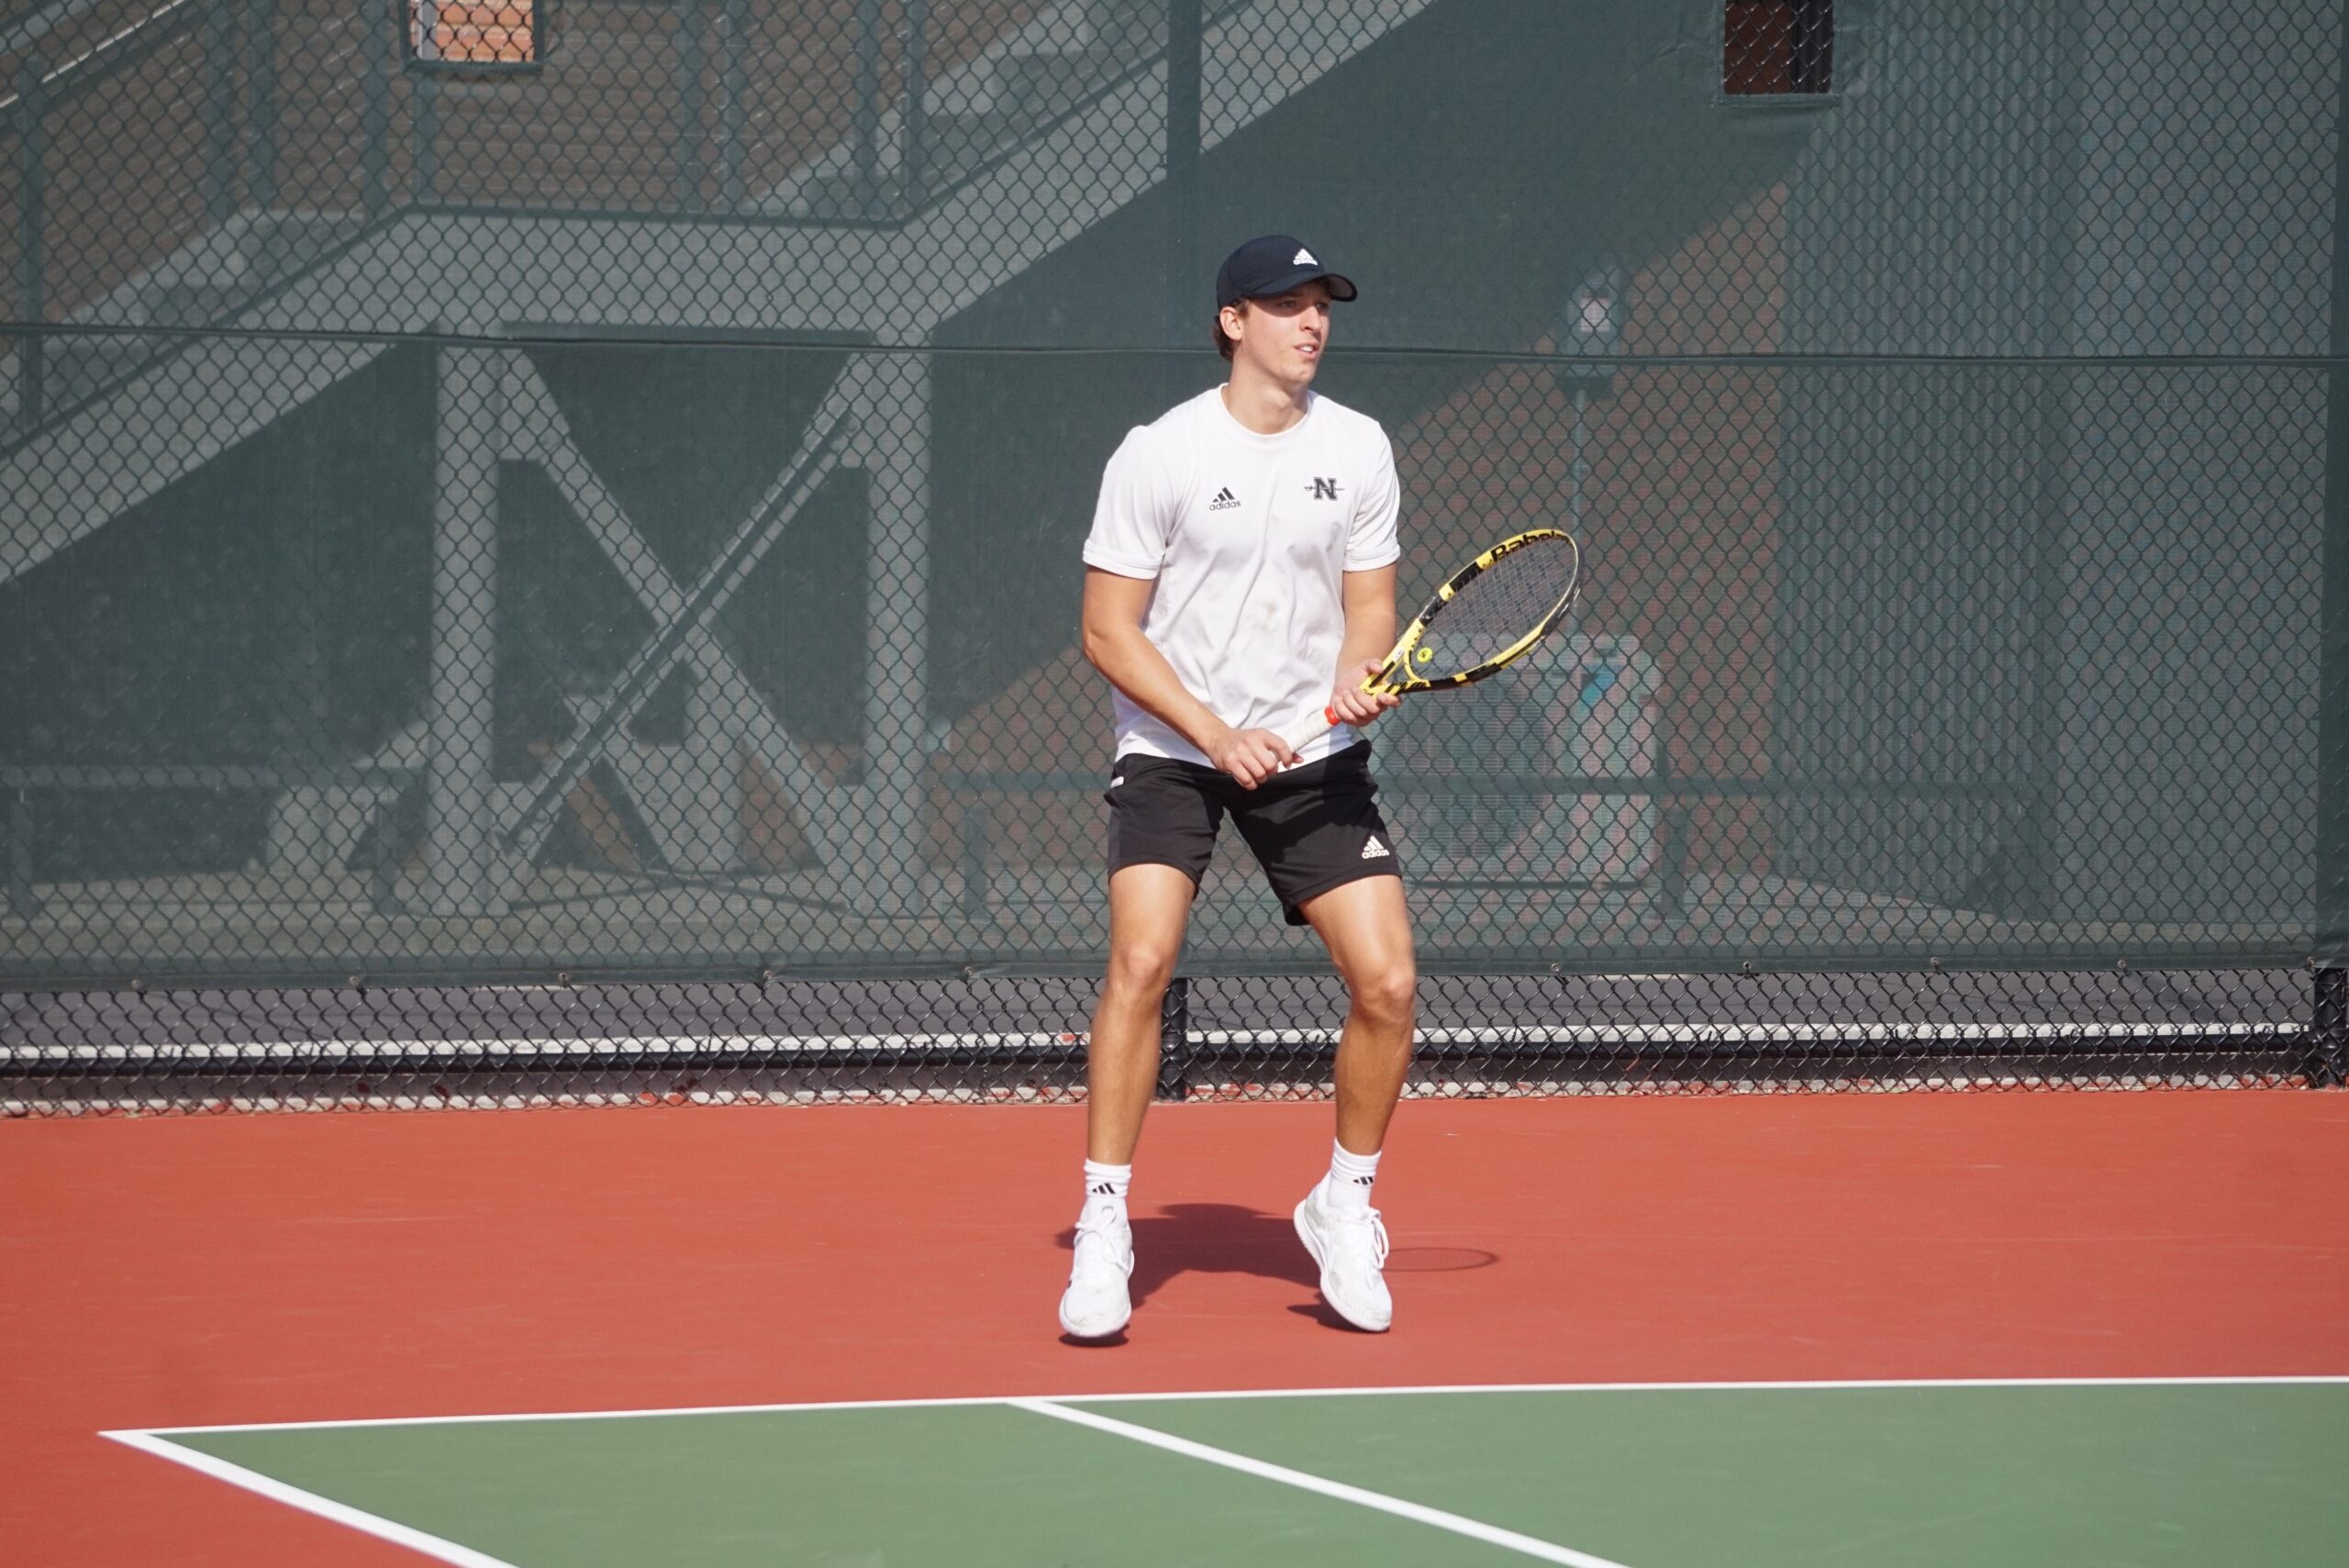 Thumbnail for Nicholls men’s tennis team earns first SLC win of the season in dominating fashion over Lamar